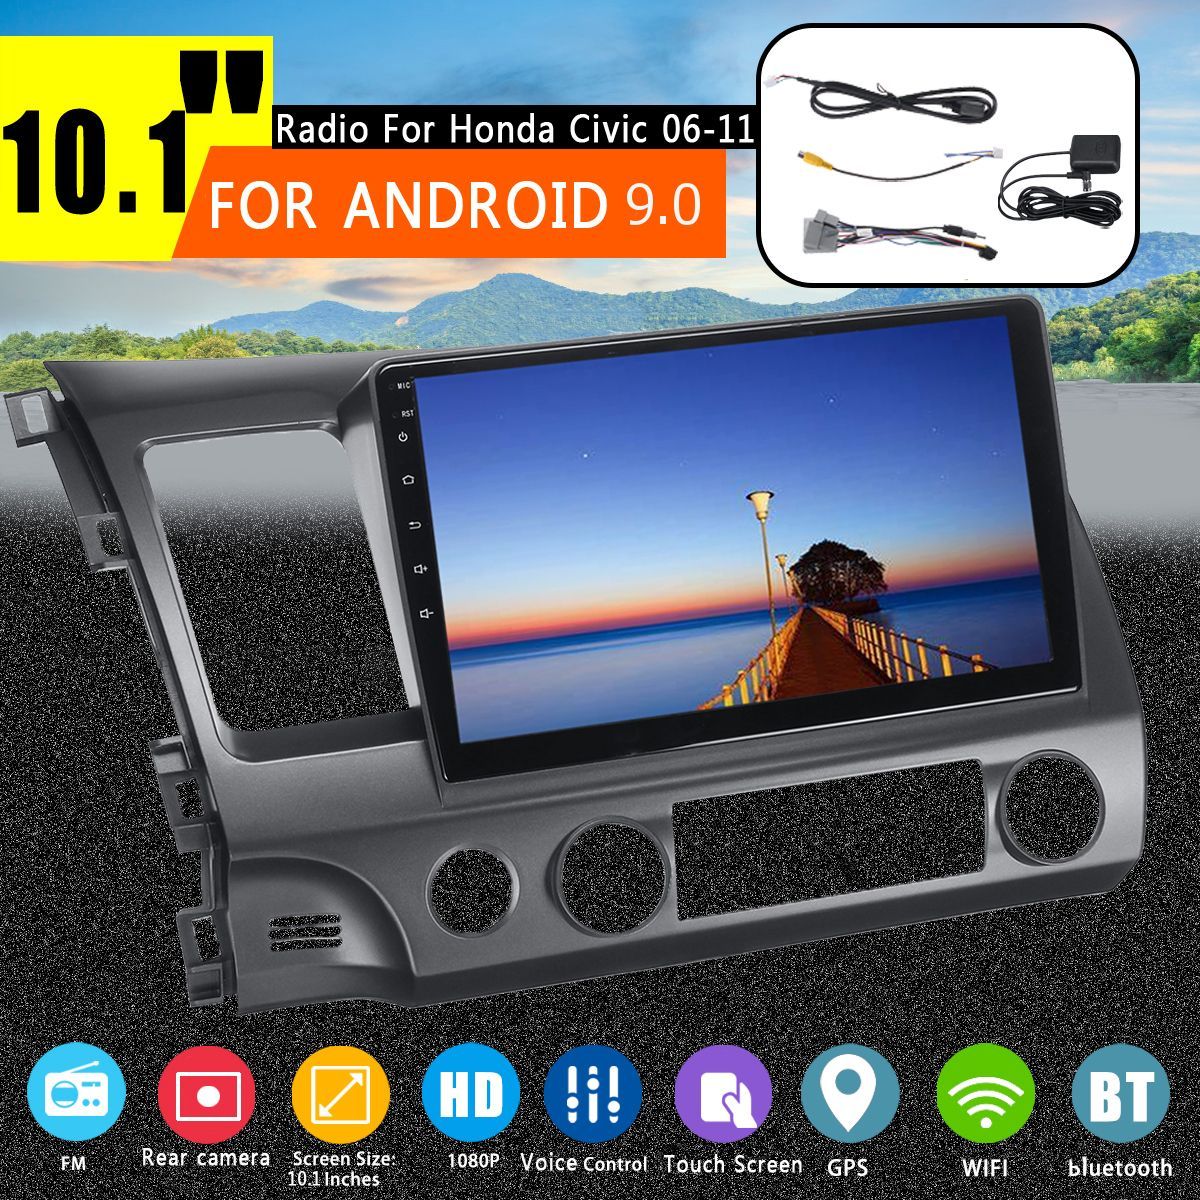 YUEHOO-101-Inch-for-Android-90-Car-MP5-Player-432G-Stereo-Radio-GPS-WIFI-4G-bluetooth-FM-AM-RDS-for--1565054